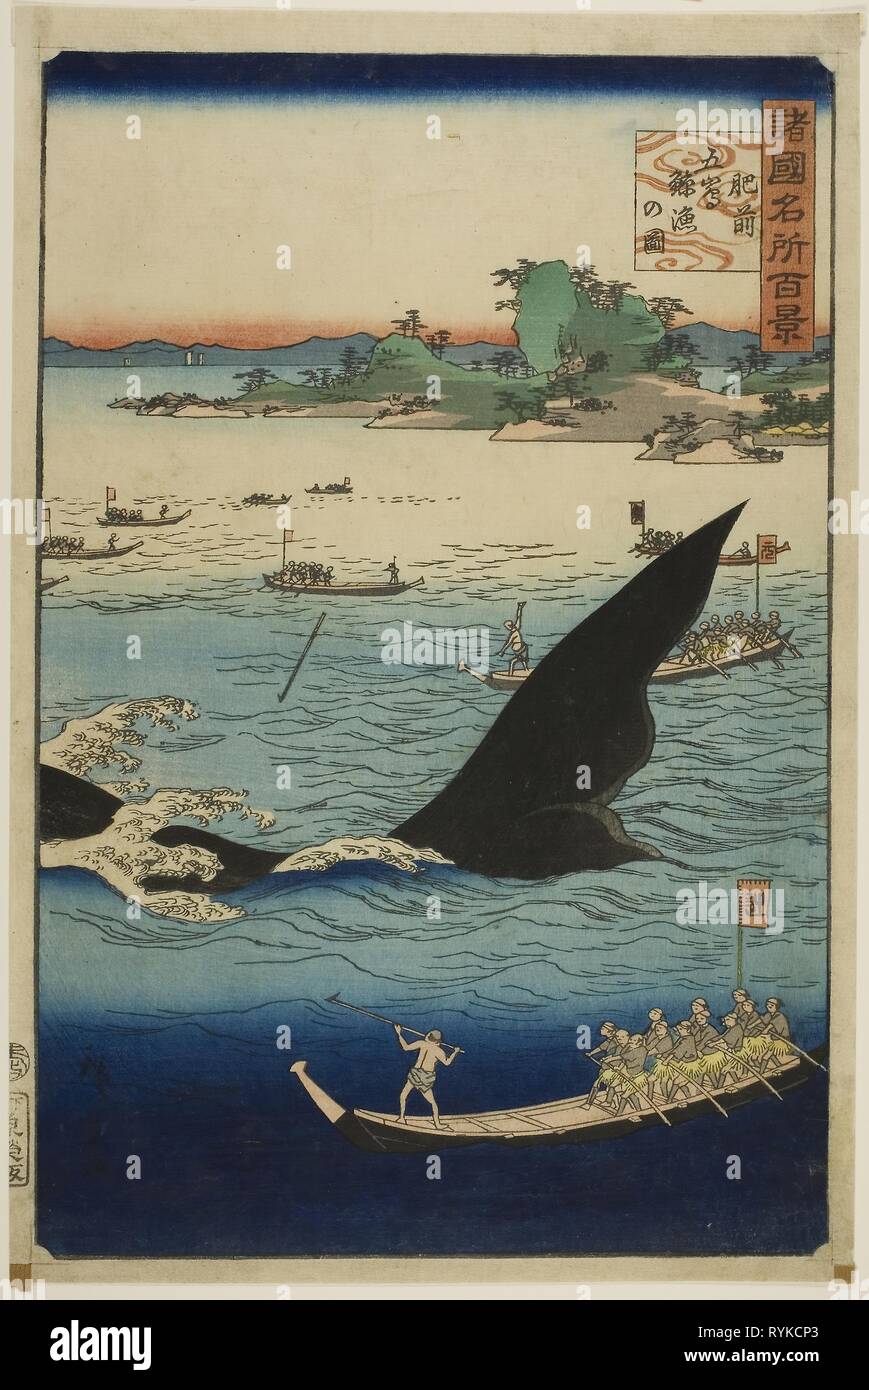 Image of a Whale Hunt at Goto, Hizen Province (Hizen Goto geiryo no zu), from the series 'One Hundred Famous Views in the Various Provinces (Shokoku meisho hyakkei)'. Utagawa Hiroshige II (Shigenobu); Japanese, 1826-1869. Date: 1859. Dimensions: . Color woodblock print. Origin: Japan. Museum: The Chicago Art Institute, Chicago, USA. Stock Photo